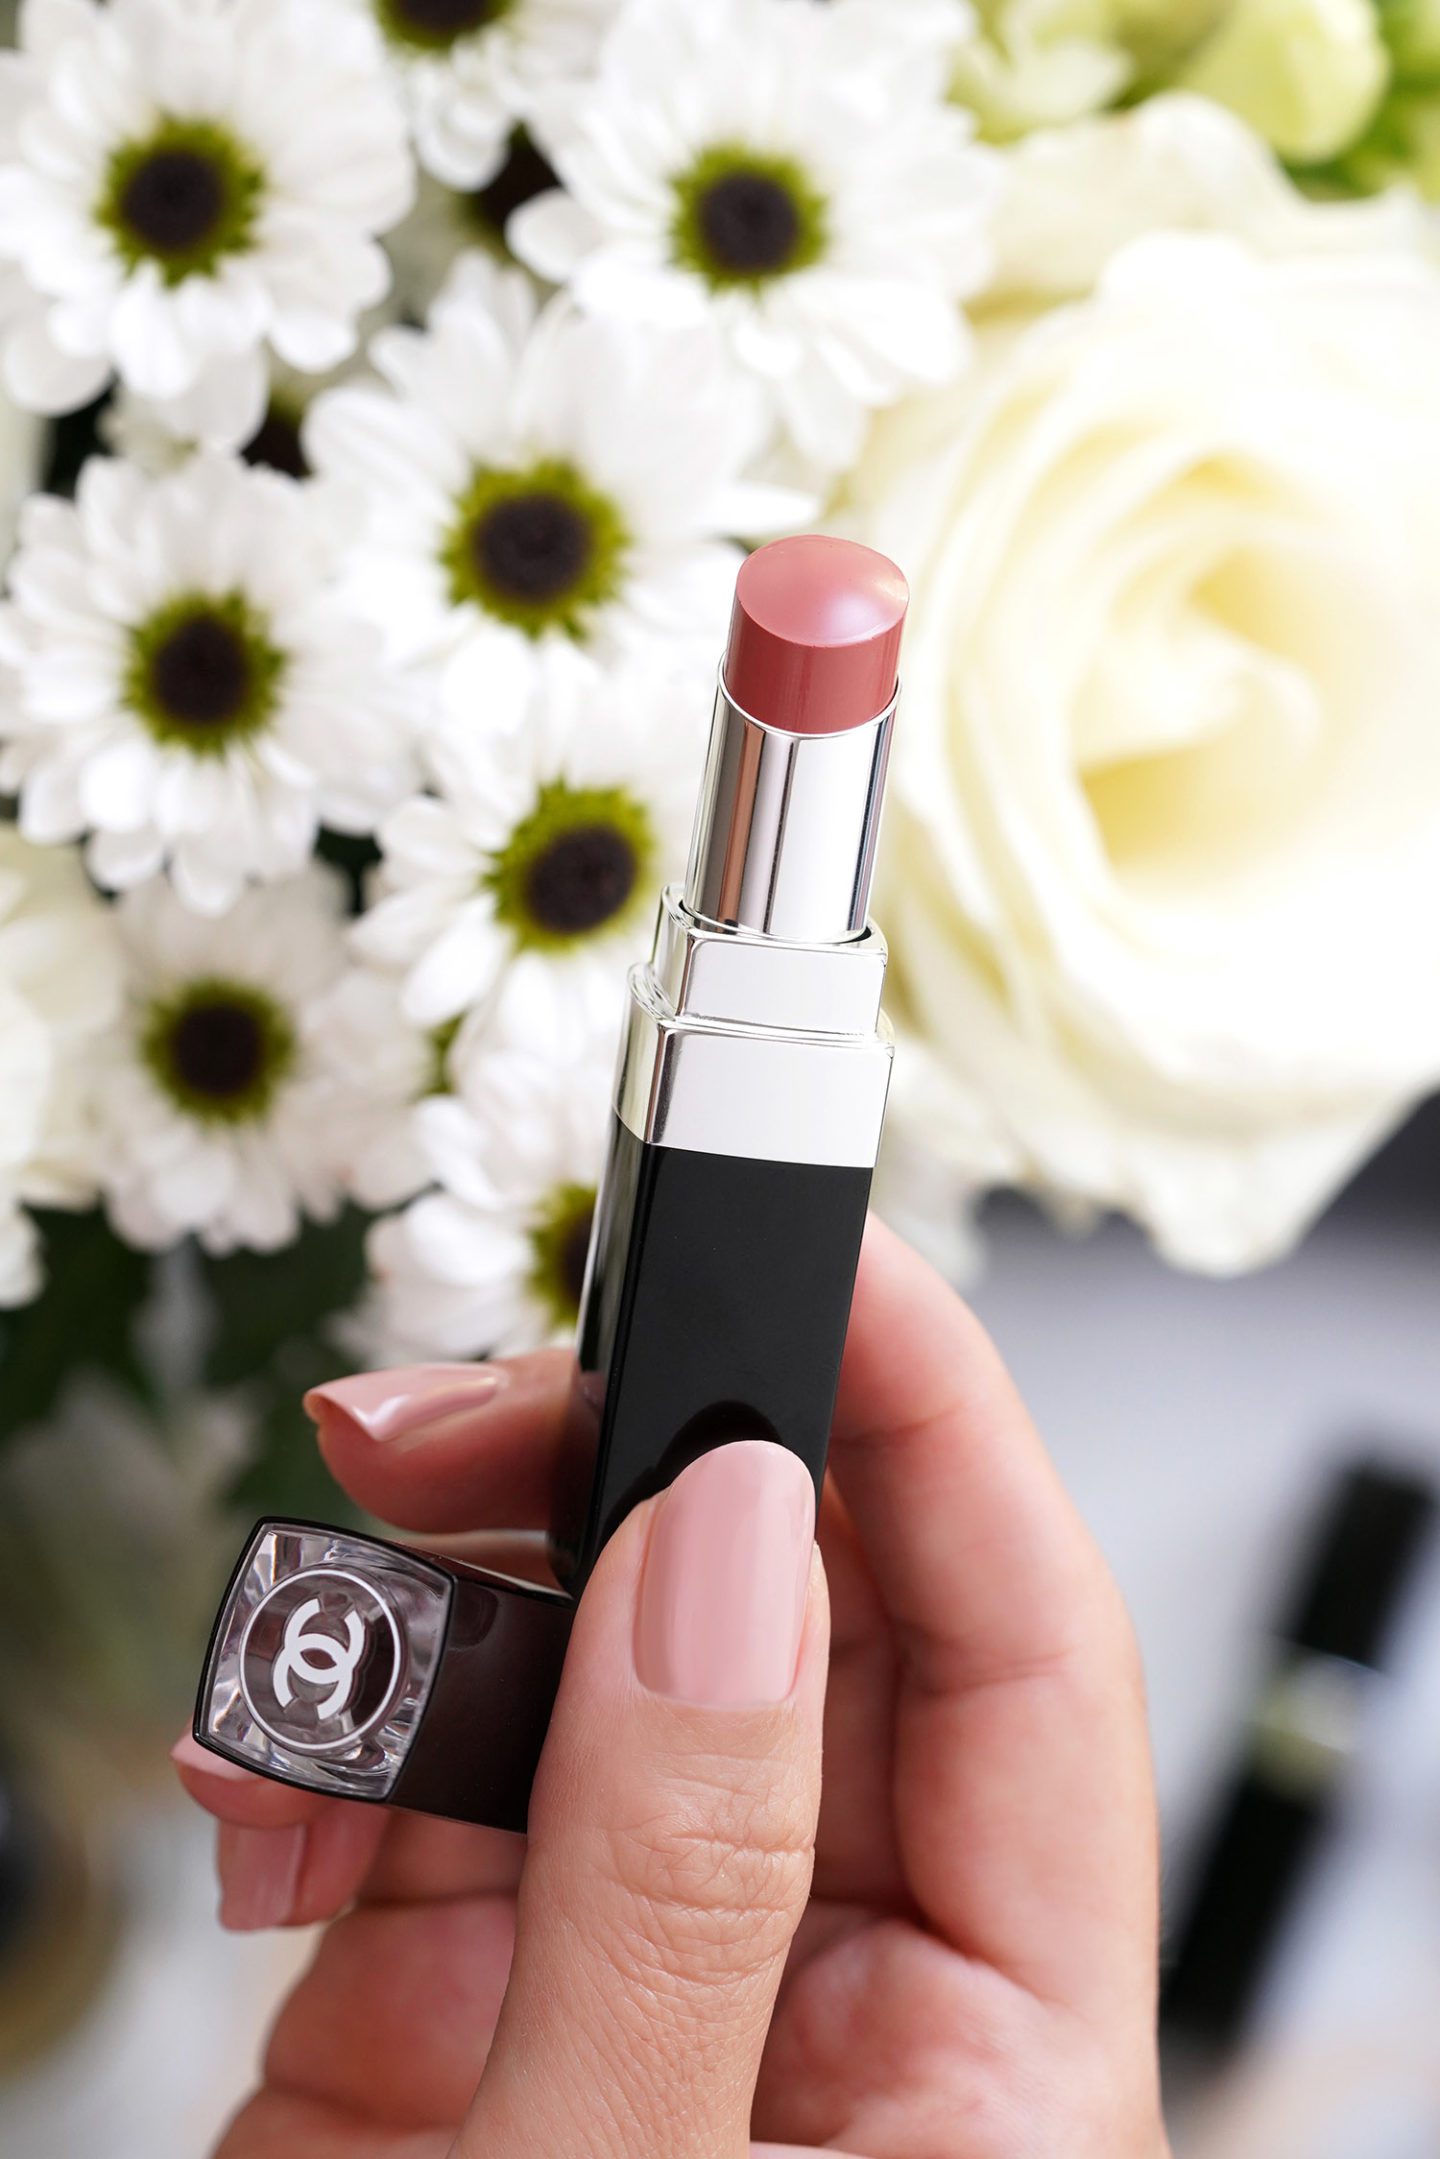 NEW CHANEL ROUGE COCO BLOOM LIPSTICKS SWATCHES & REVIEW, 112 Opportunity, 122 Zenith